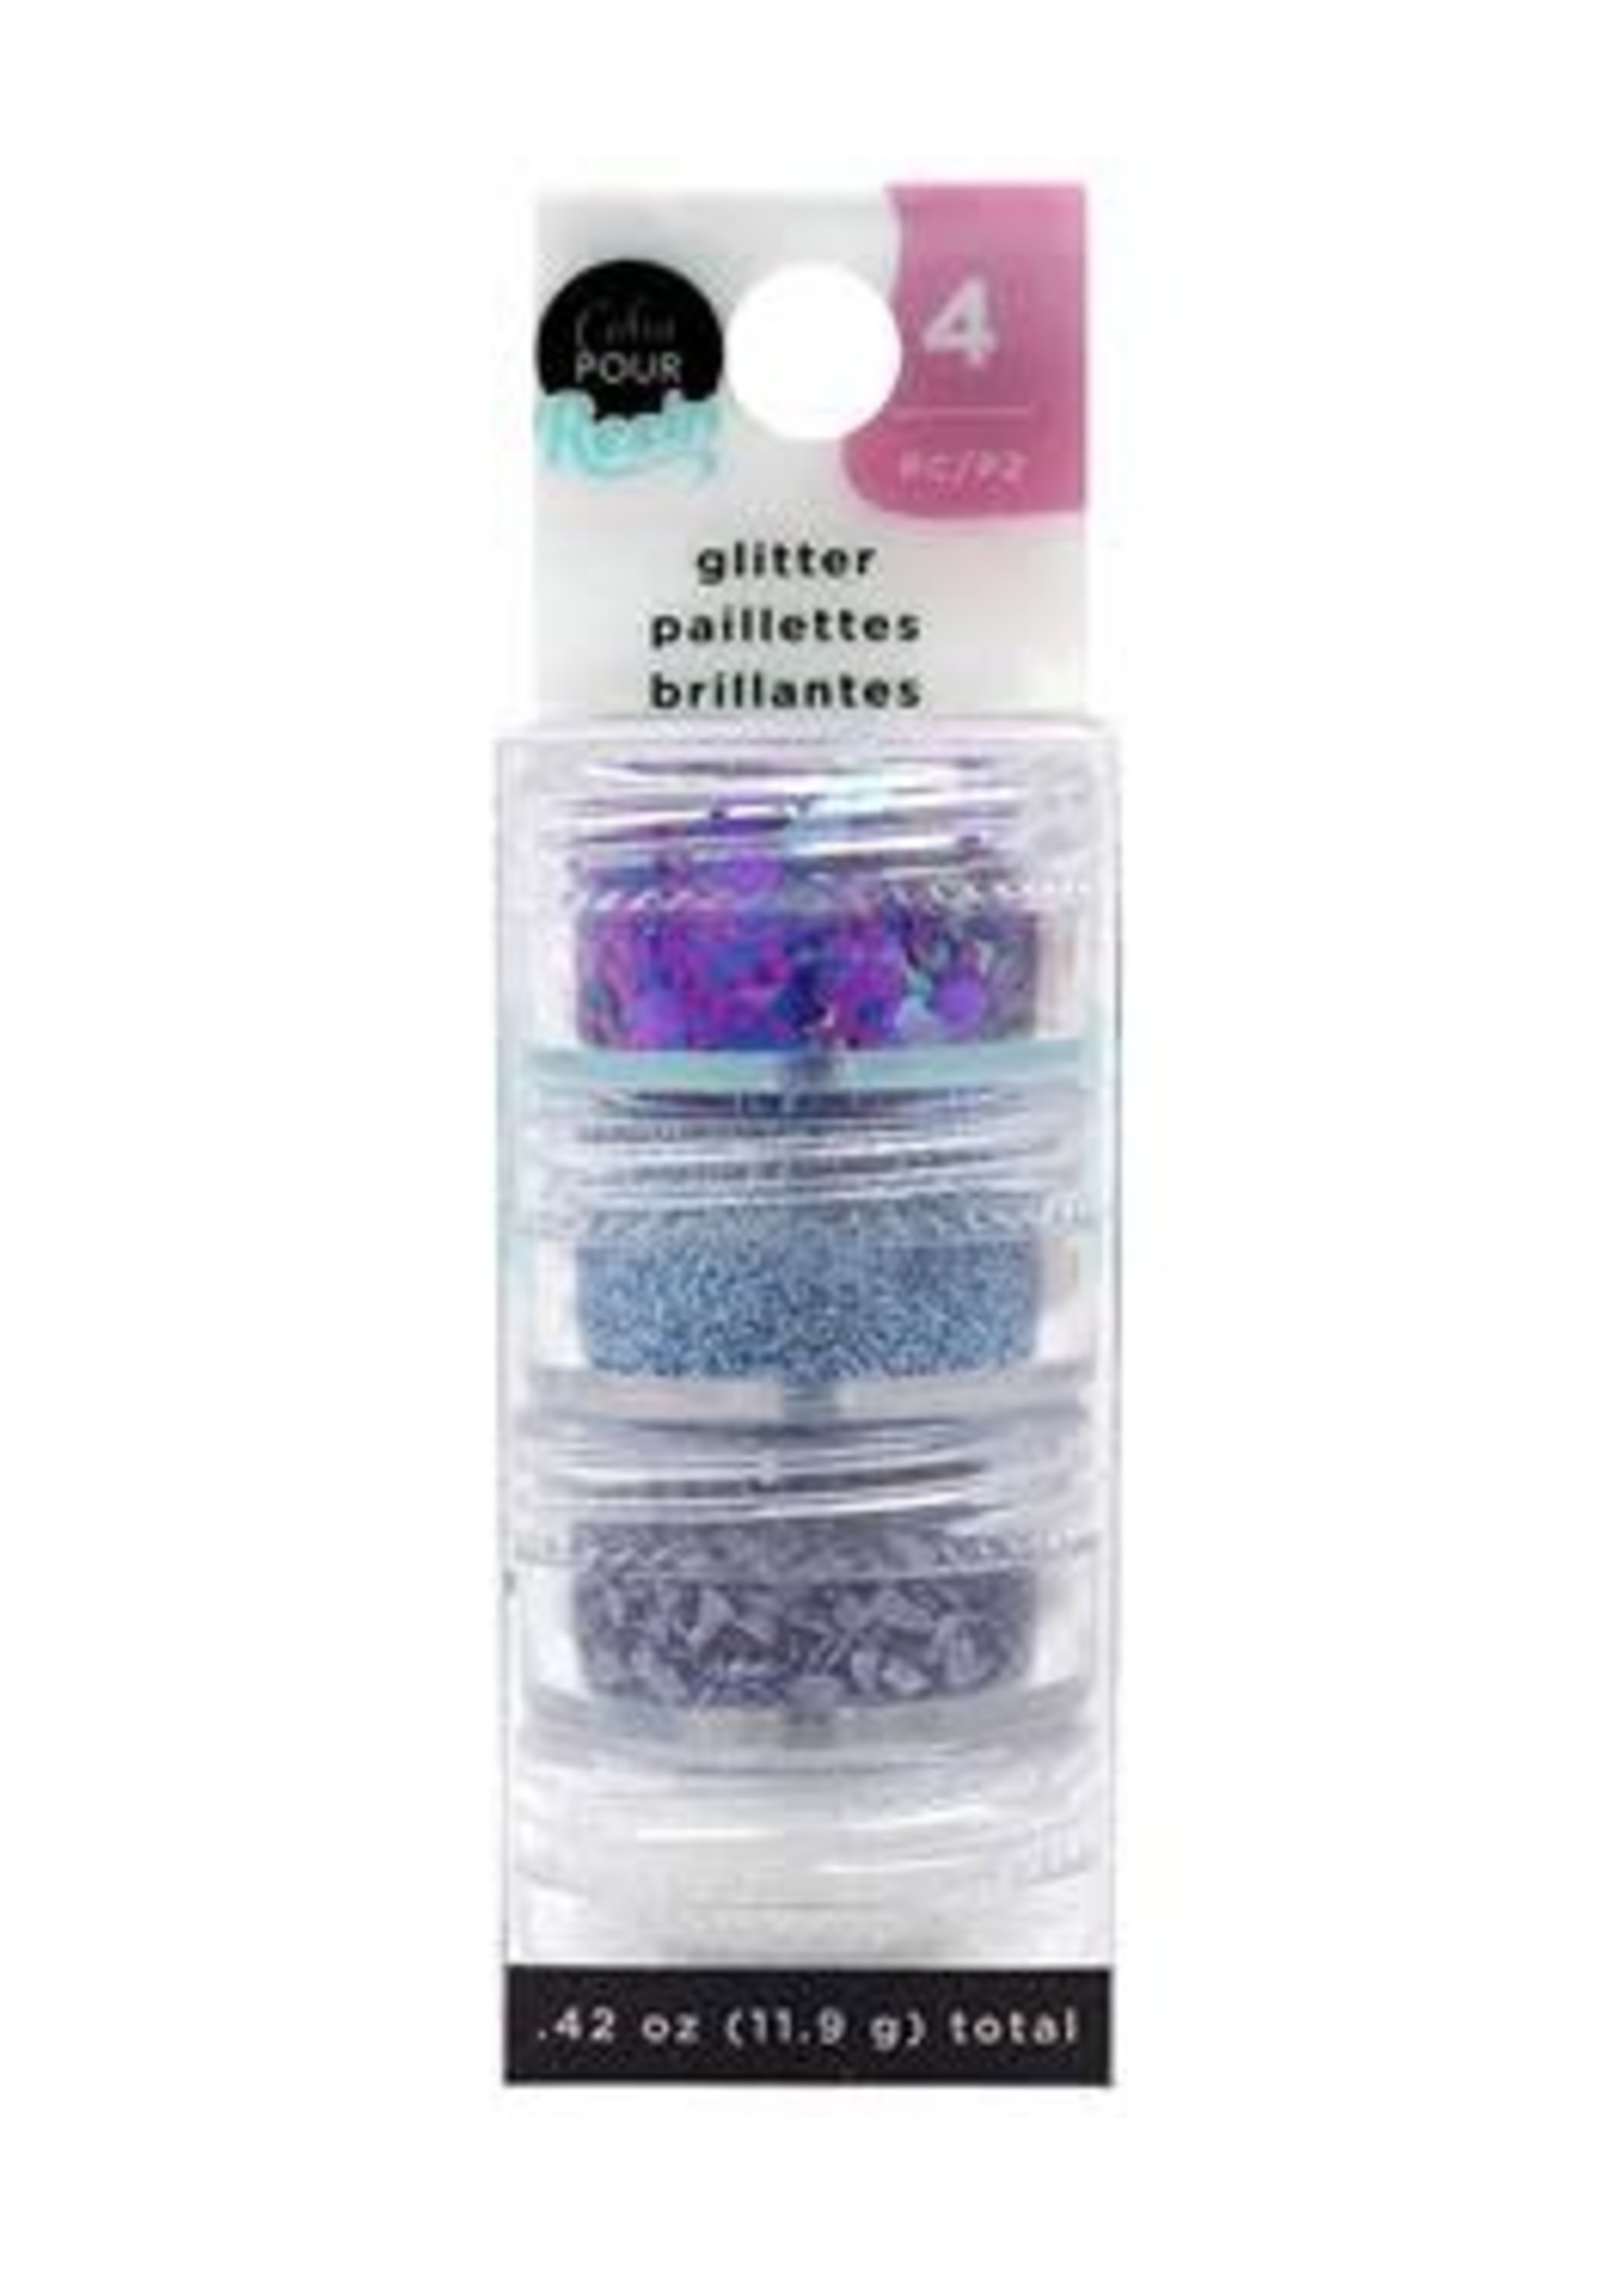 American Crafts Color Pour Resin Mix In Glitter Geode